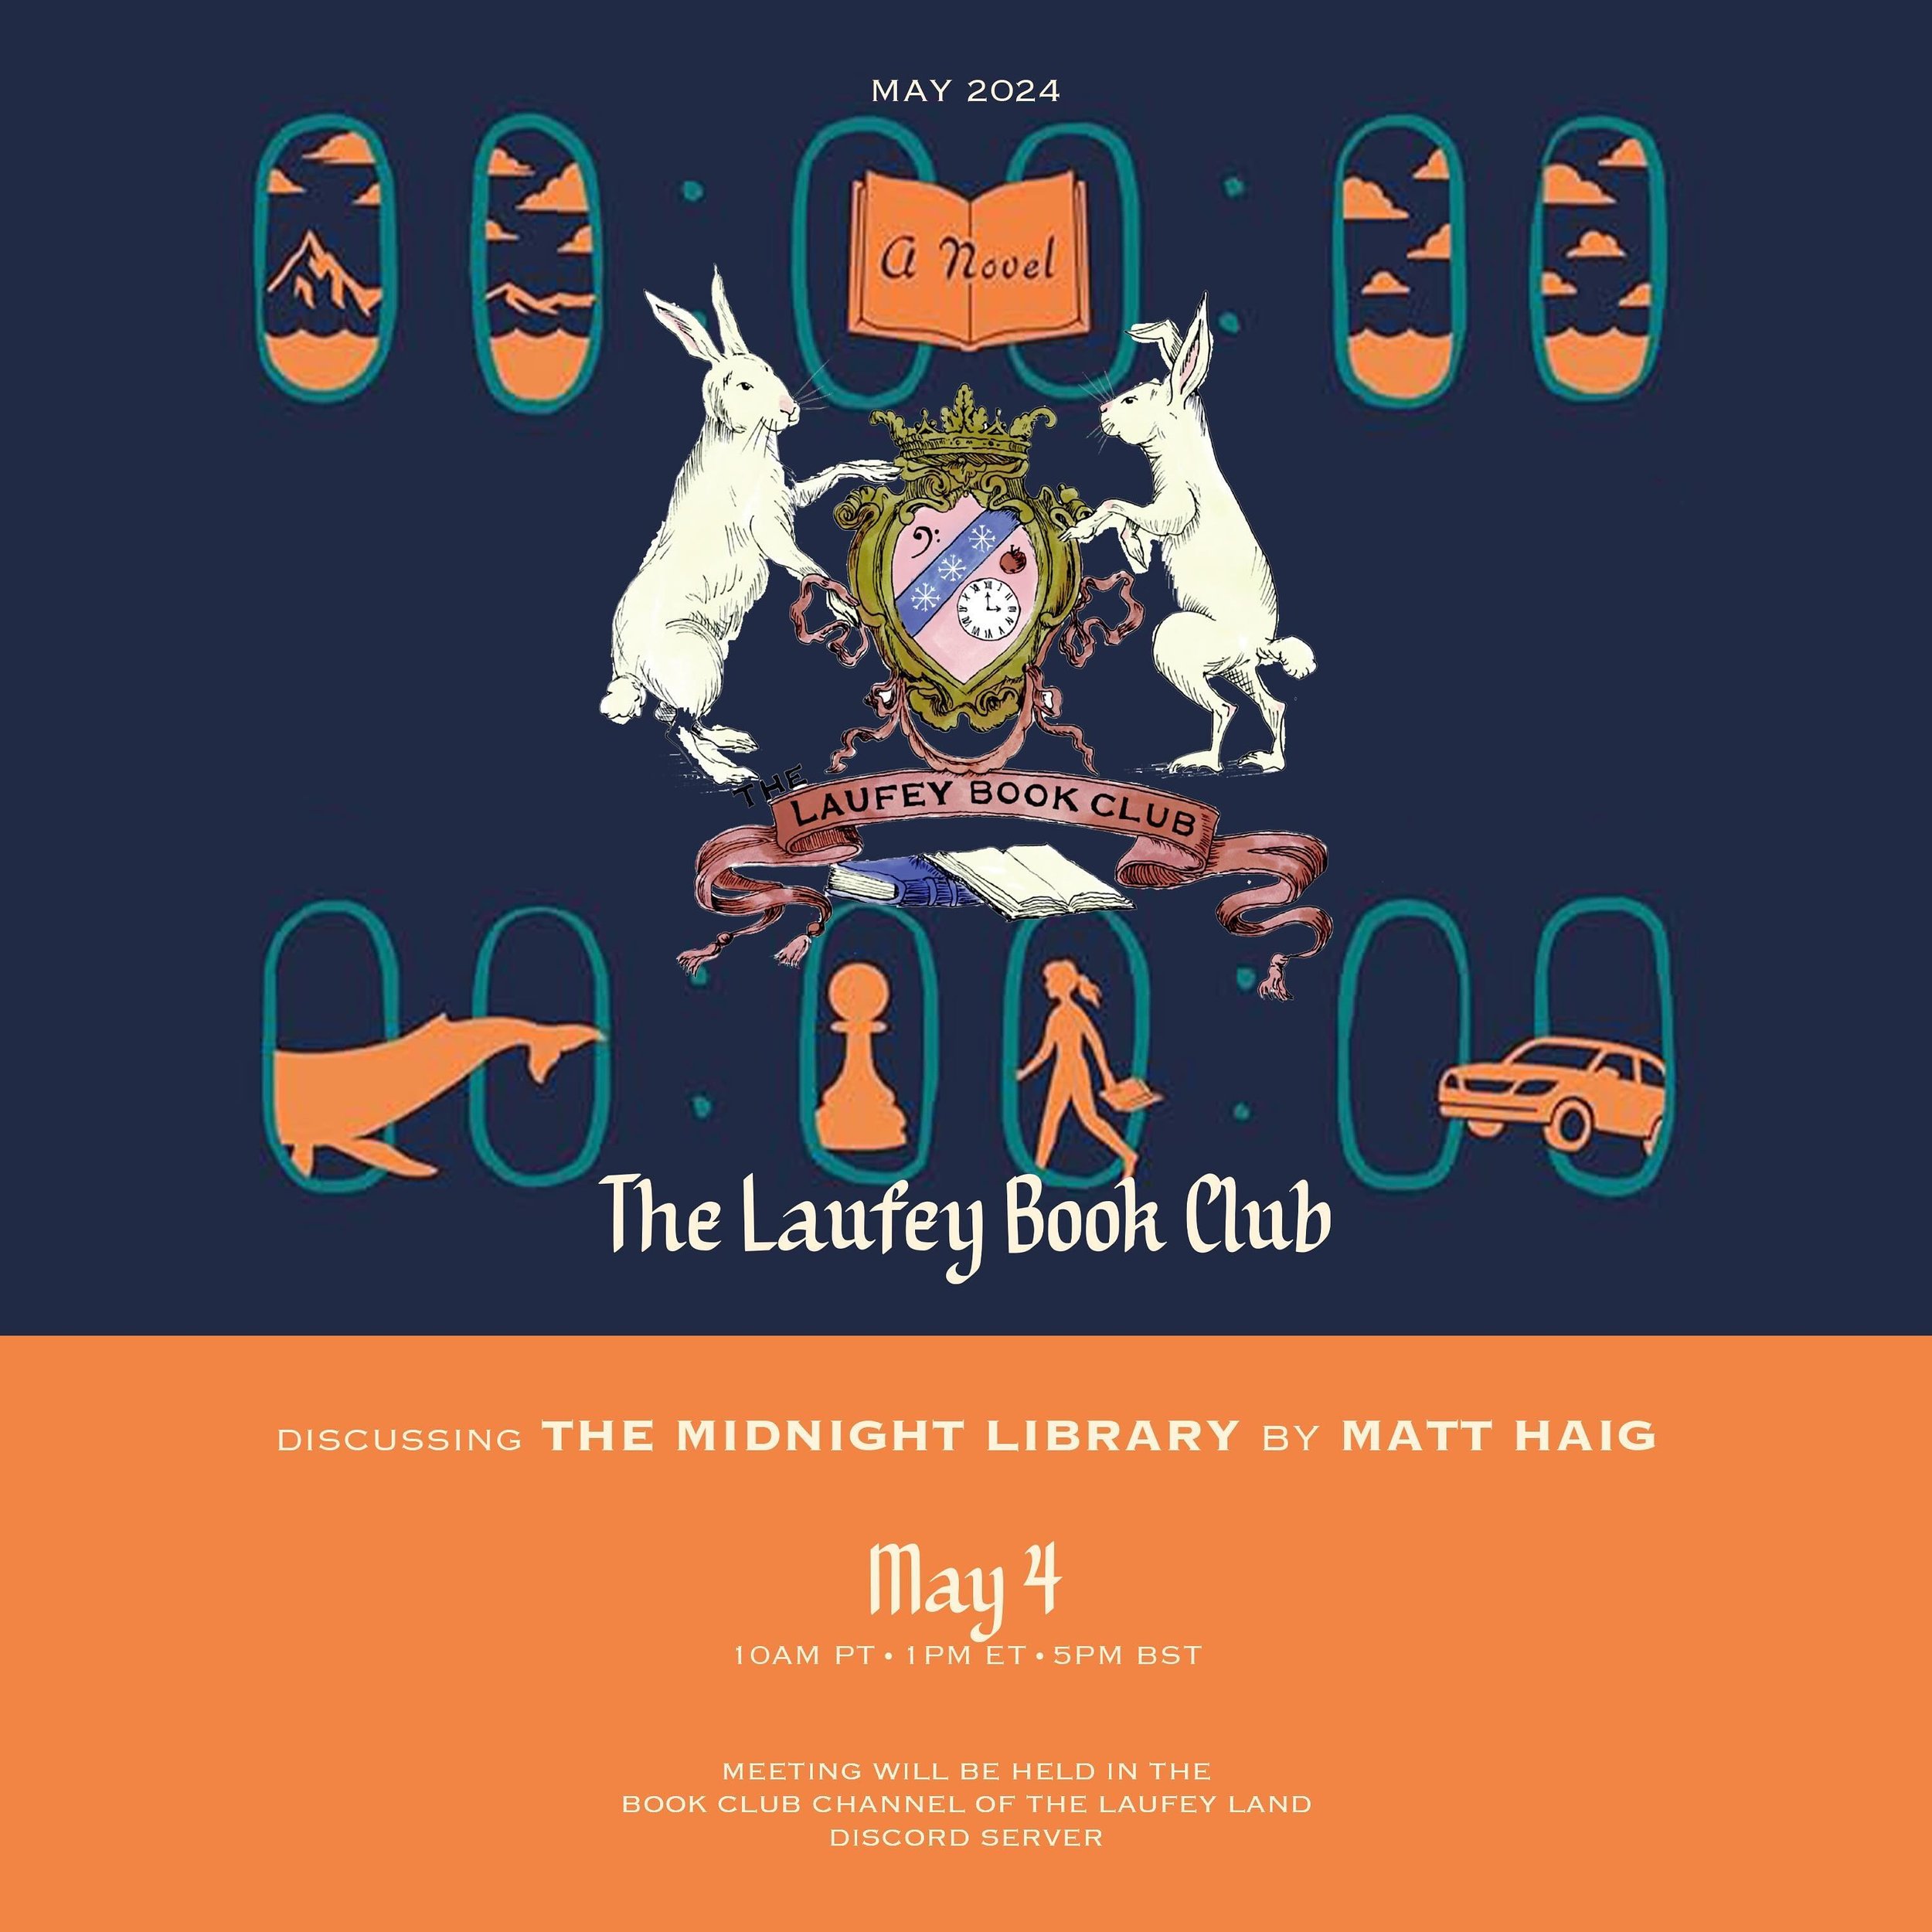 The next Laufey Book Club meeting will be held on May 4th in the book club channel of the Laufey Land discord server! We will be discussing this month&rsquo;s novel &ldquo;The Midnight Library&rdquo; by Matt Haig 🤍 Visit the link in bio to join the 